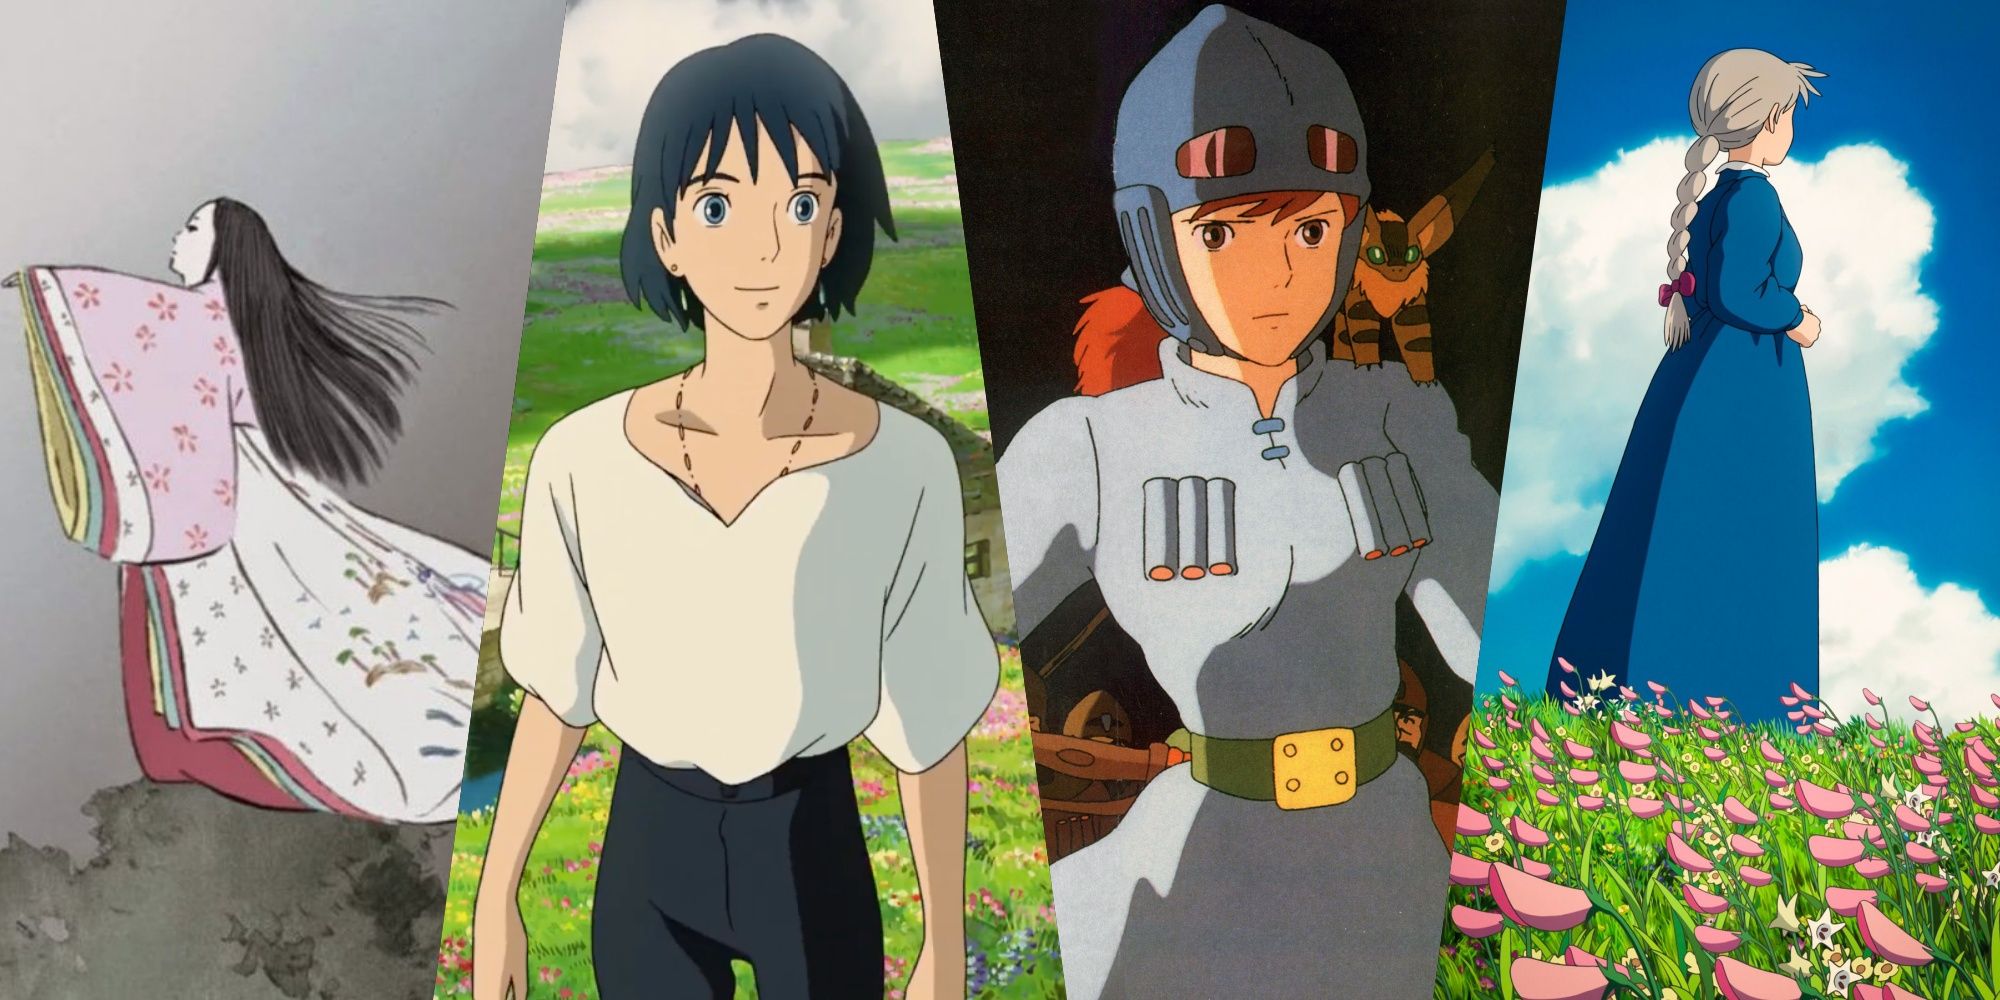 Collage of iconic outfits/looks from Ghibli films